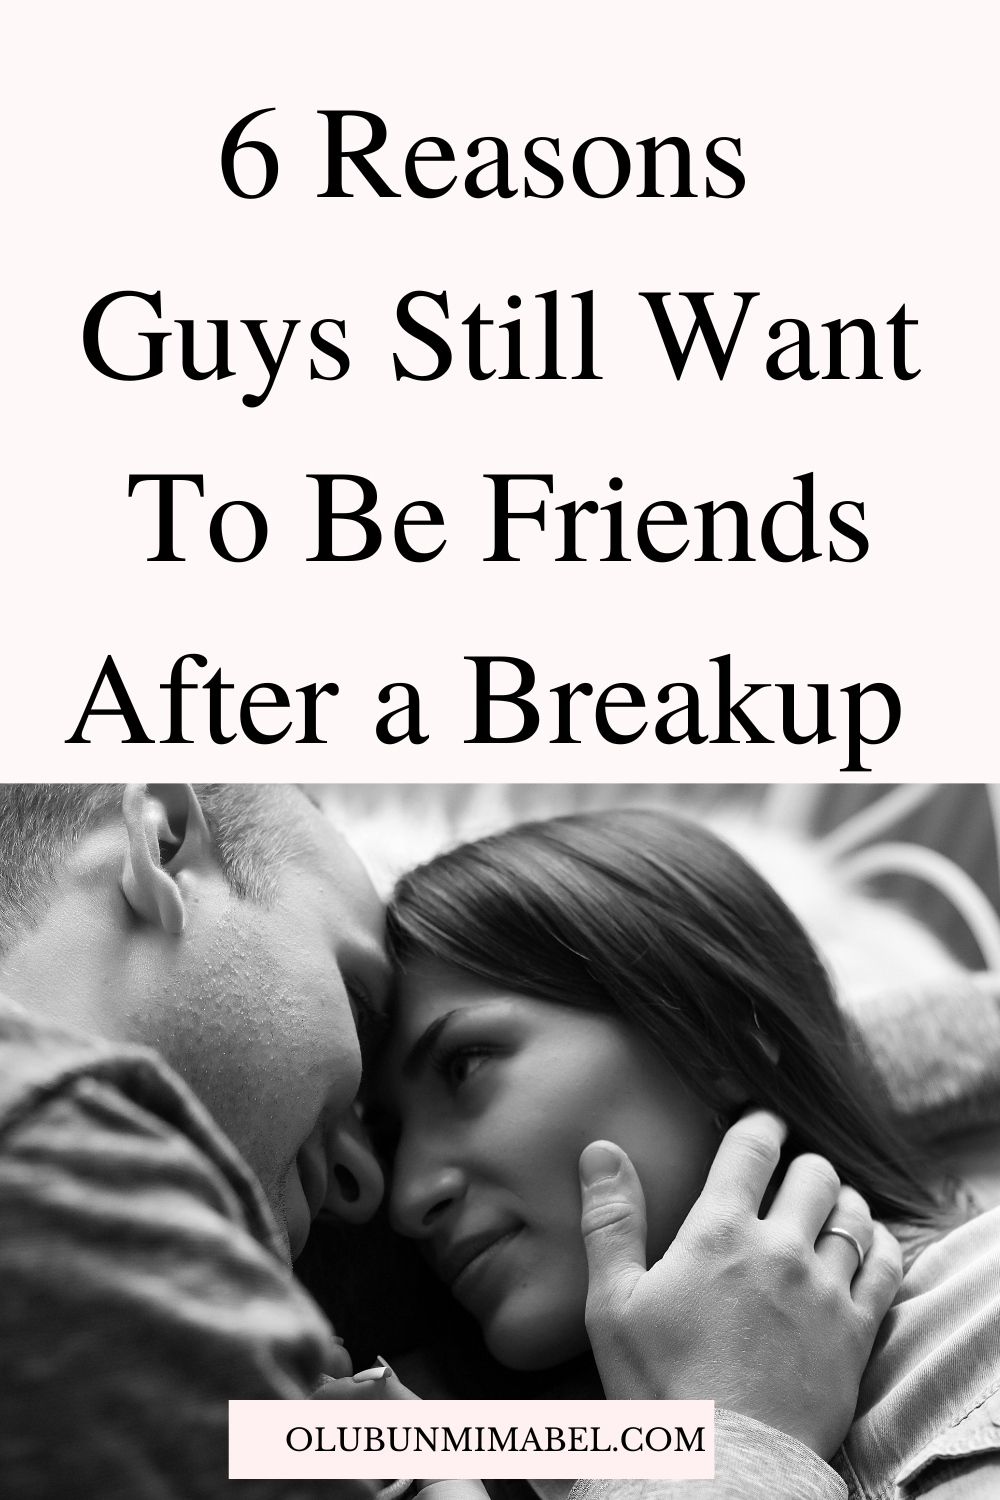 Do Guys Really Want To Be Friends After A Breakup?